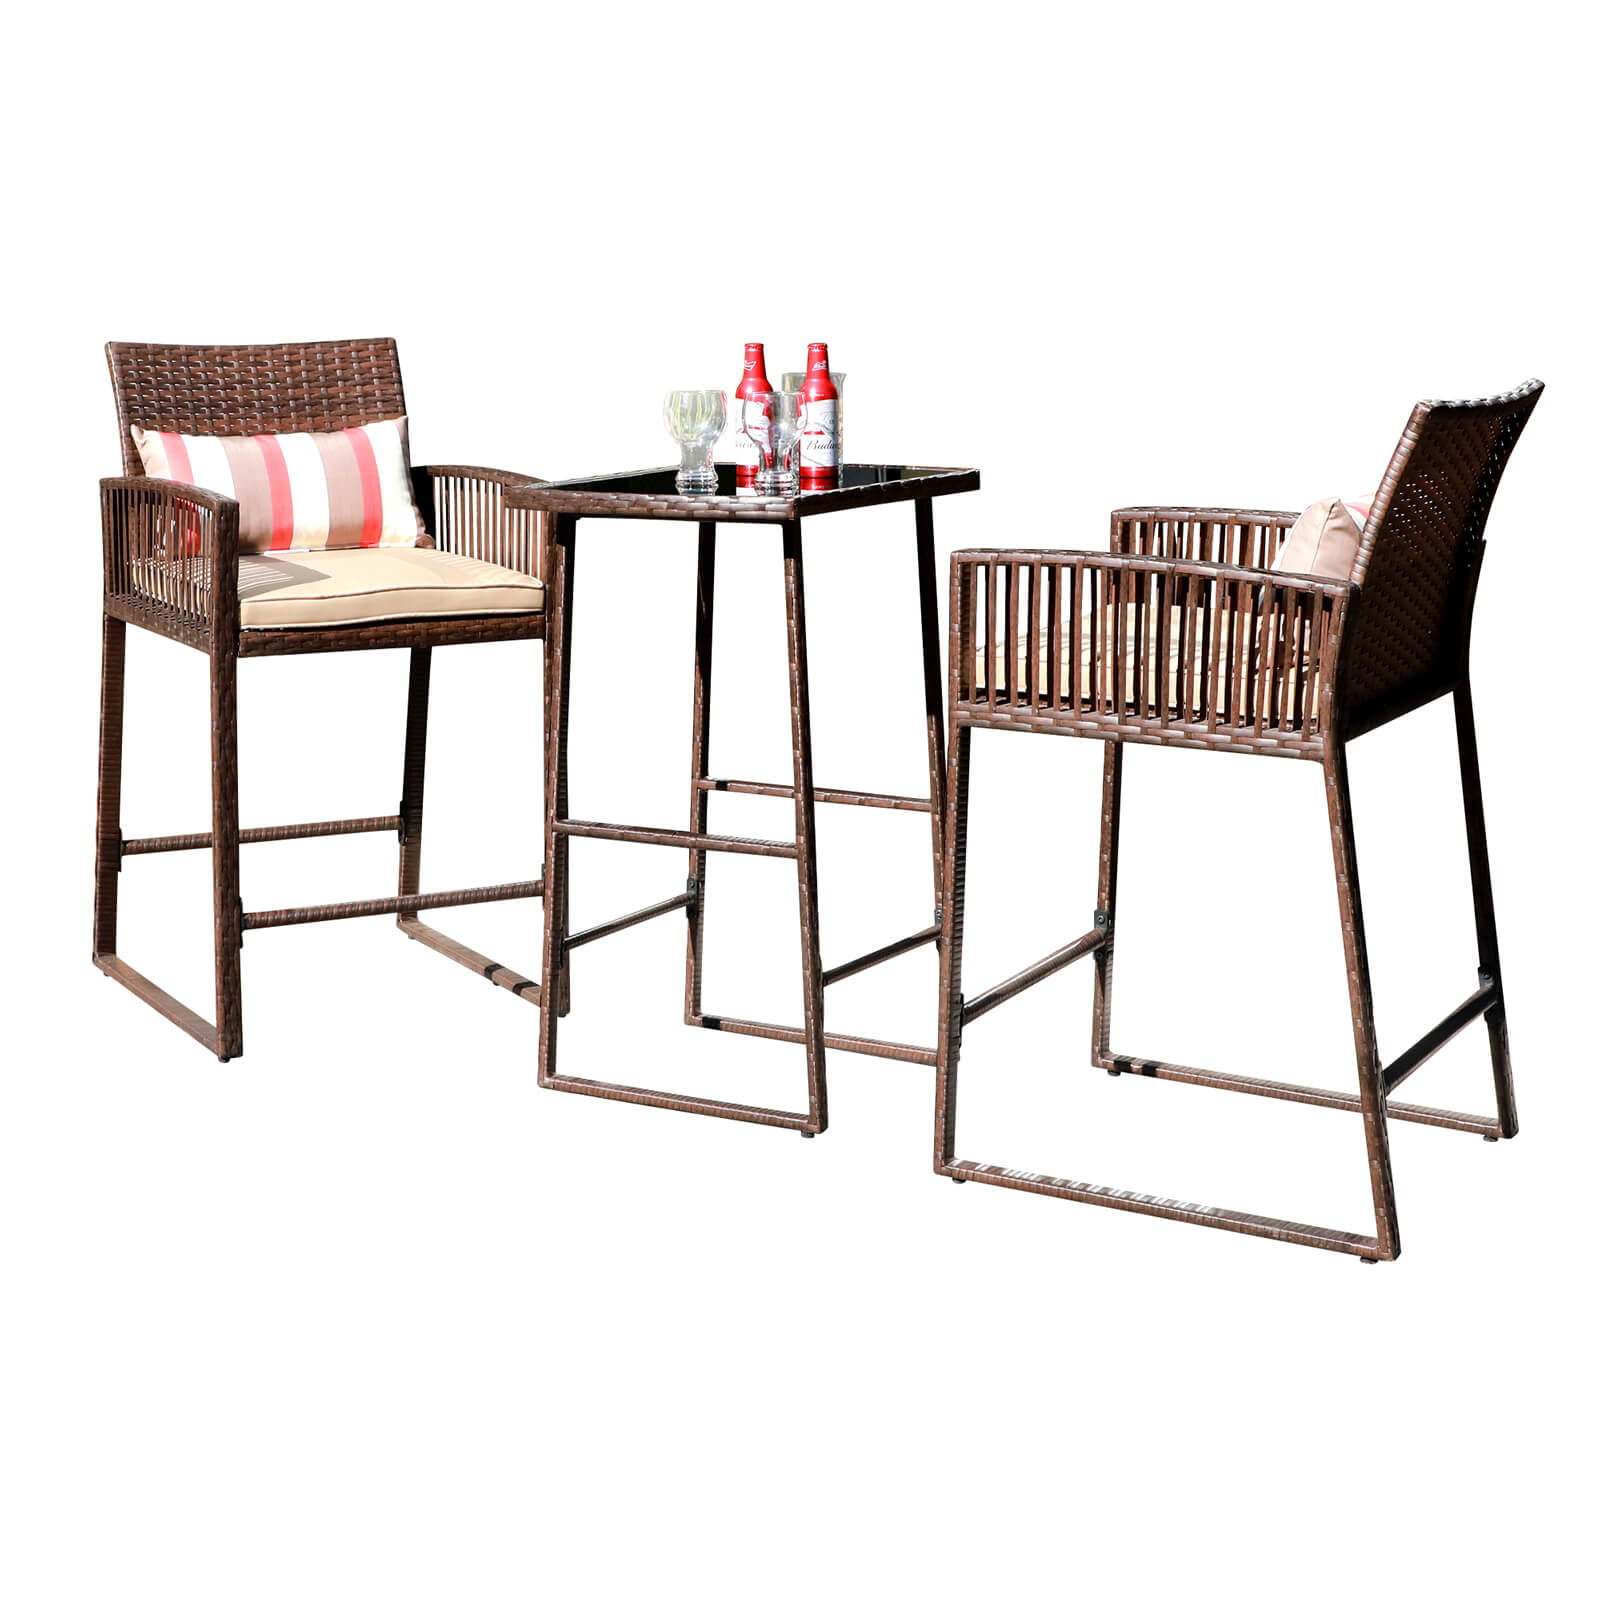 3pcs Outdoor Dining Set Wicker Patio Bar Set with Cushions